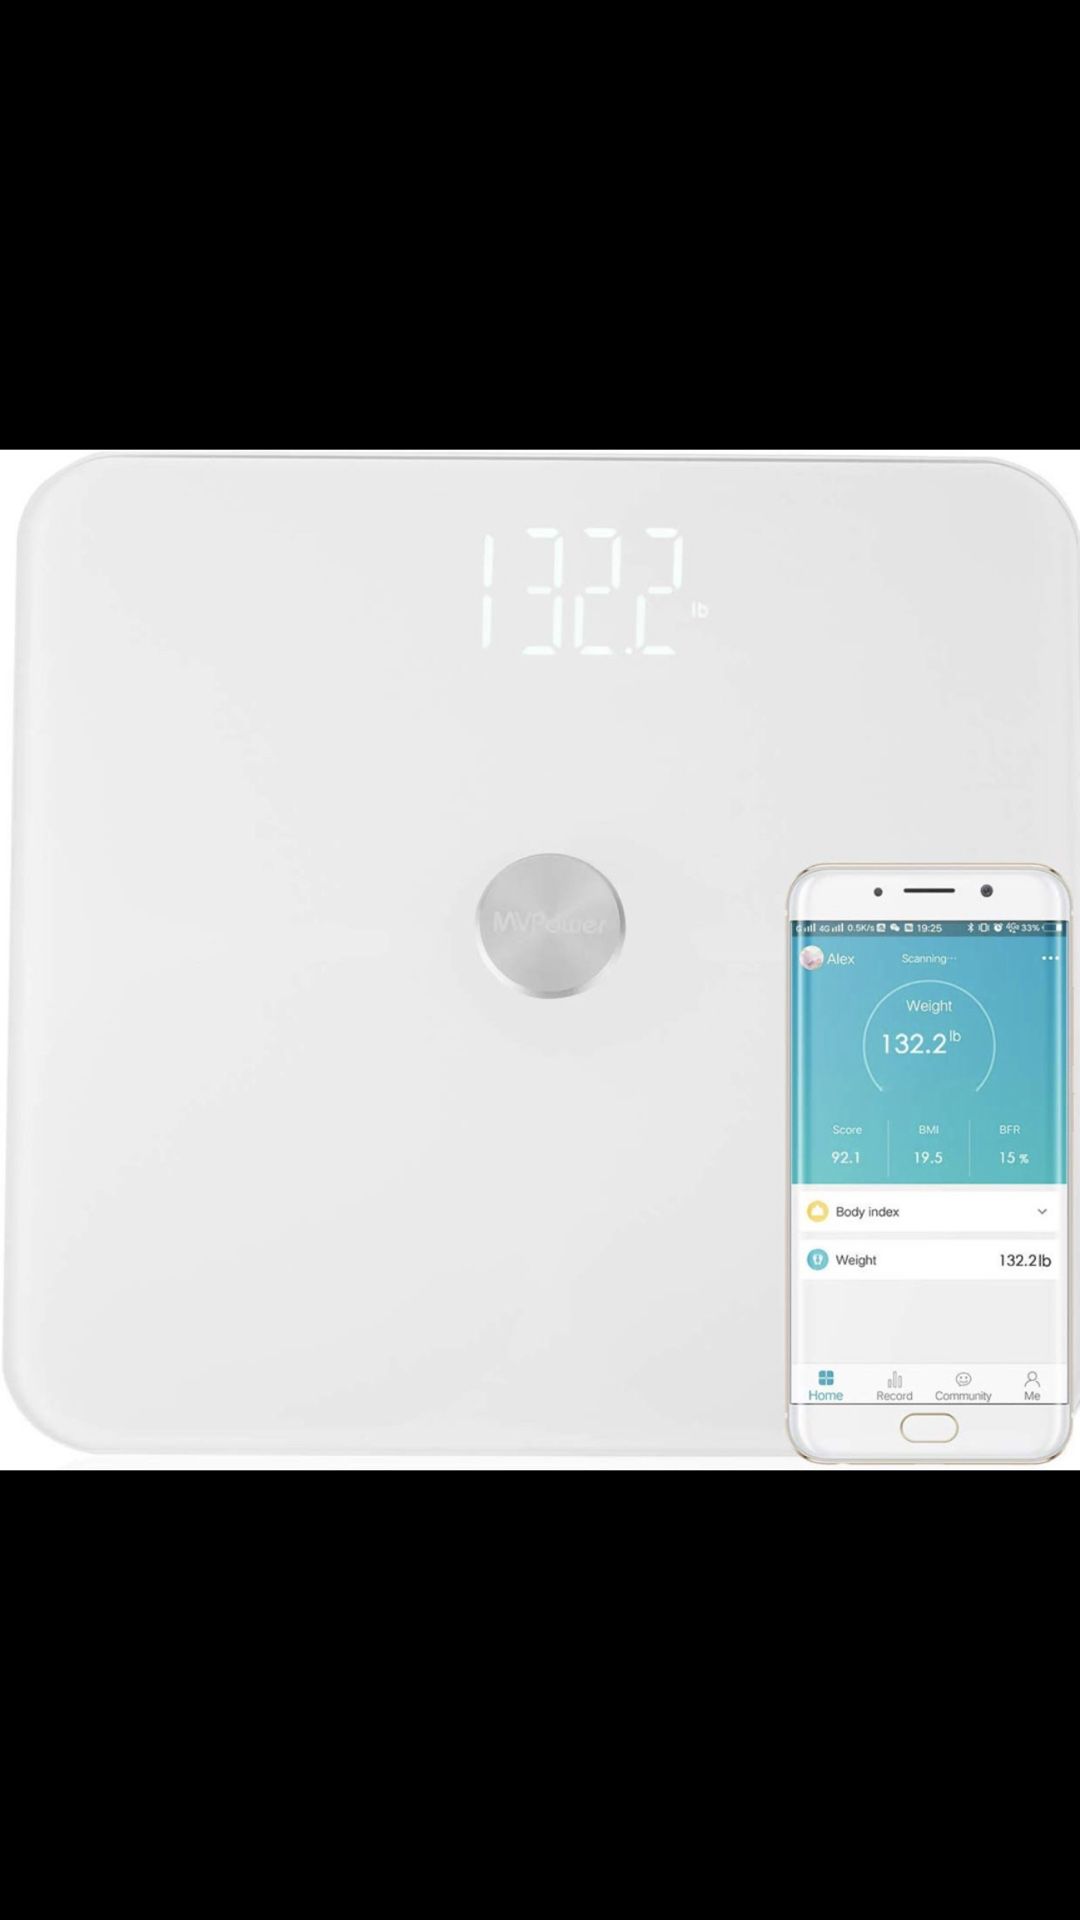 MVPower Bluetooth Body Fat Scale-Smart BMI Digital Bathroom Wireless Weight Scale with ITO Conductive Glass,Body Composition Analyzer with Smartphone